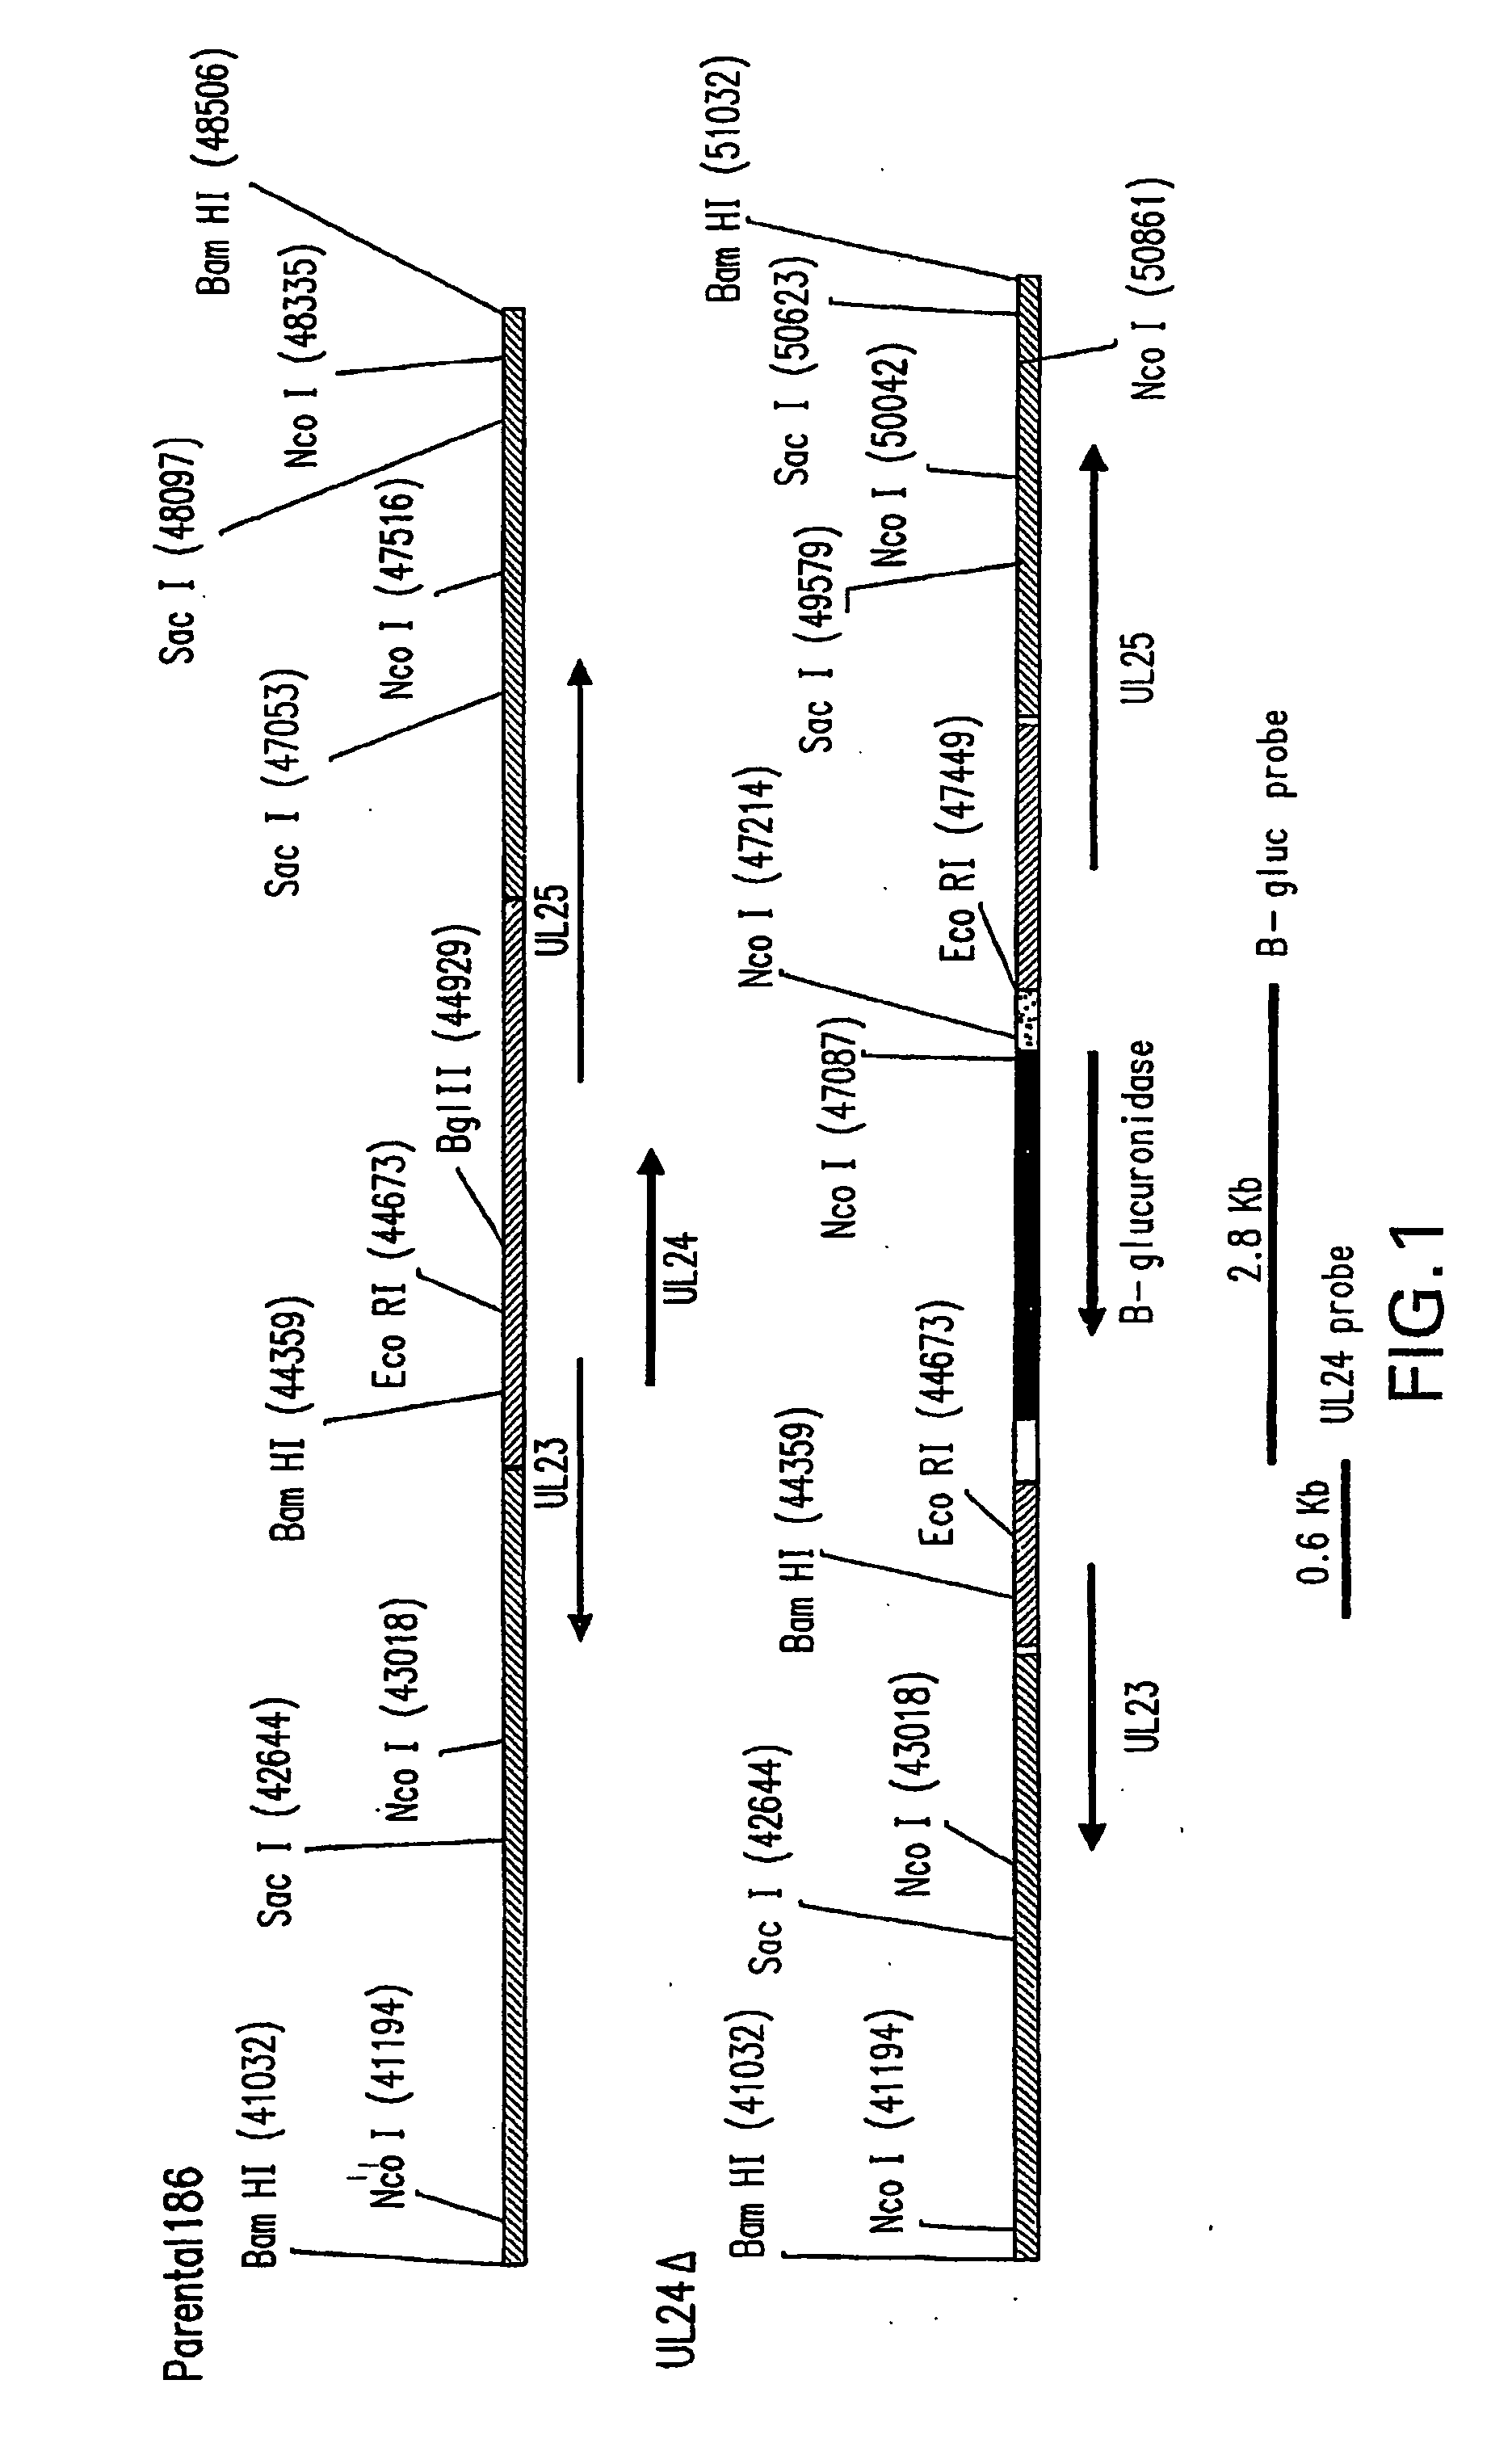 Attenuated Herpes Simplex Virus Type-2, Vectors Thereof and Immunogenic Compositions Thereof